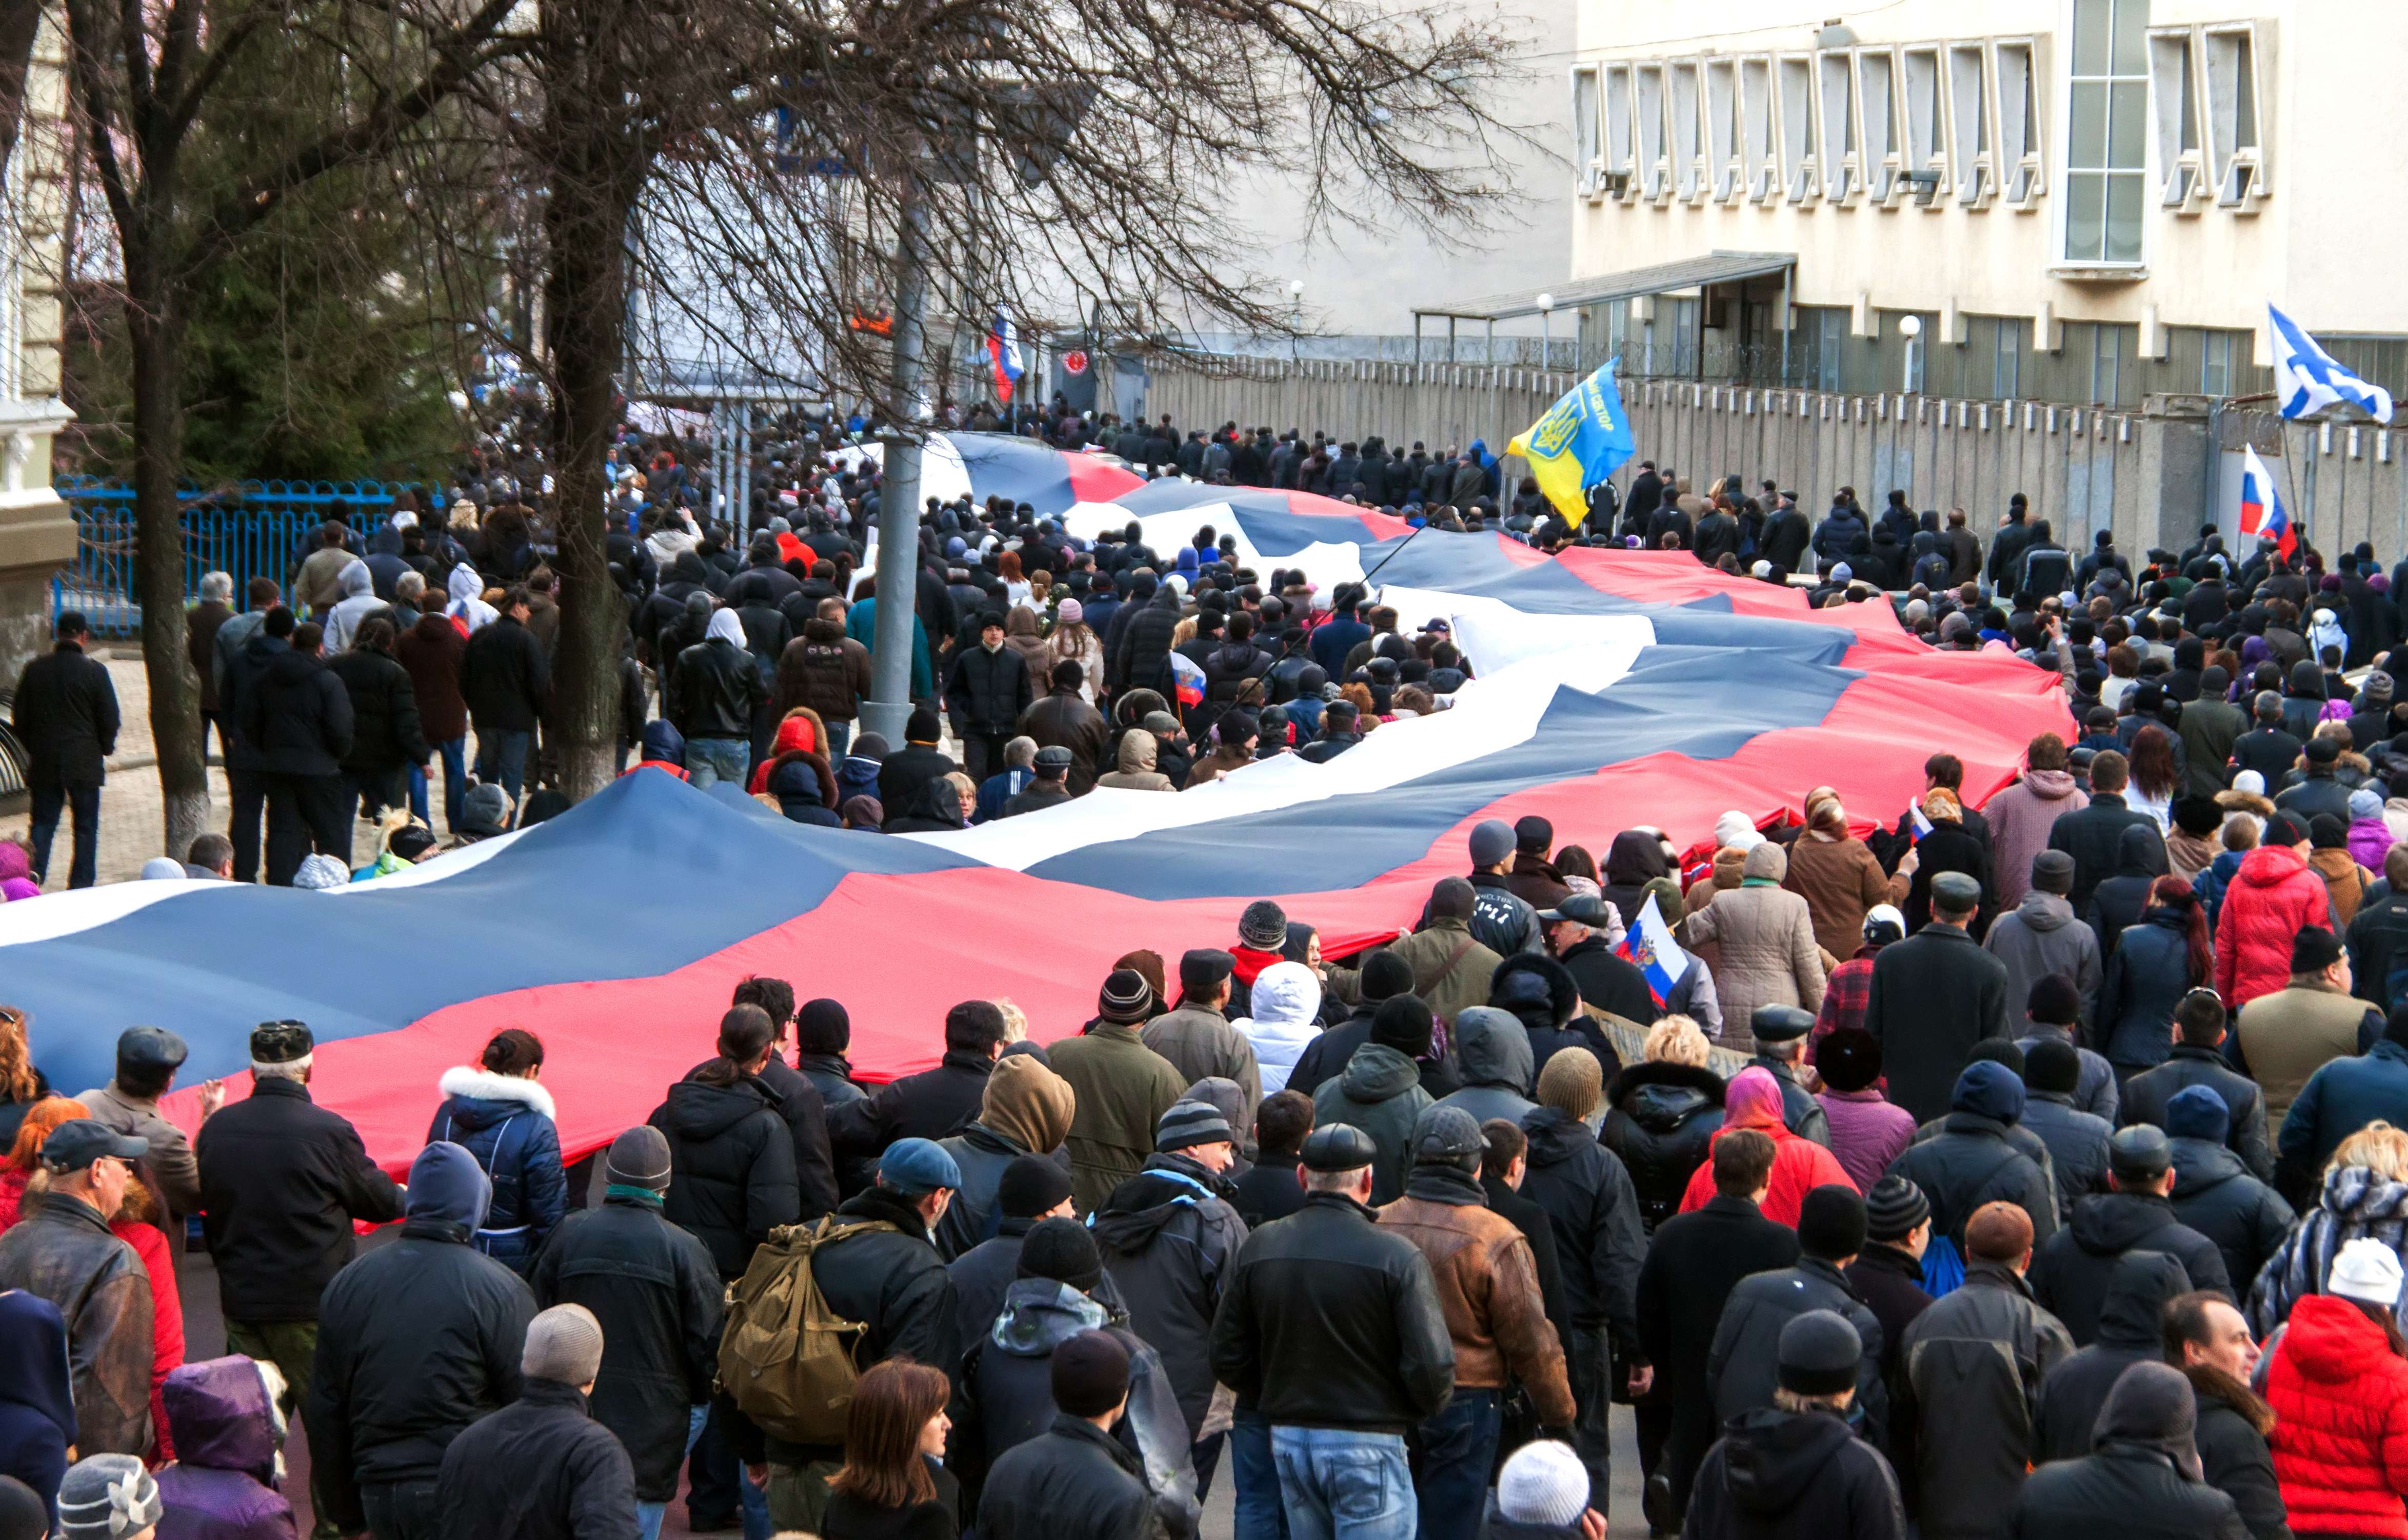 Pro-Russian supporters carry a huge Russian flag during a rally in Kharkiv, eastern Ukraine, some 40 km from the Russian frontier, on March 16, 2014. 6,000 protesters held a "meeting-referendum" to ask for more independence and reclaim the "sovereignty" of the Russian language, on the day Crimea voted to join Russian rule and break away from Ukraine.